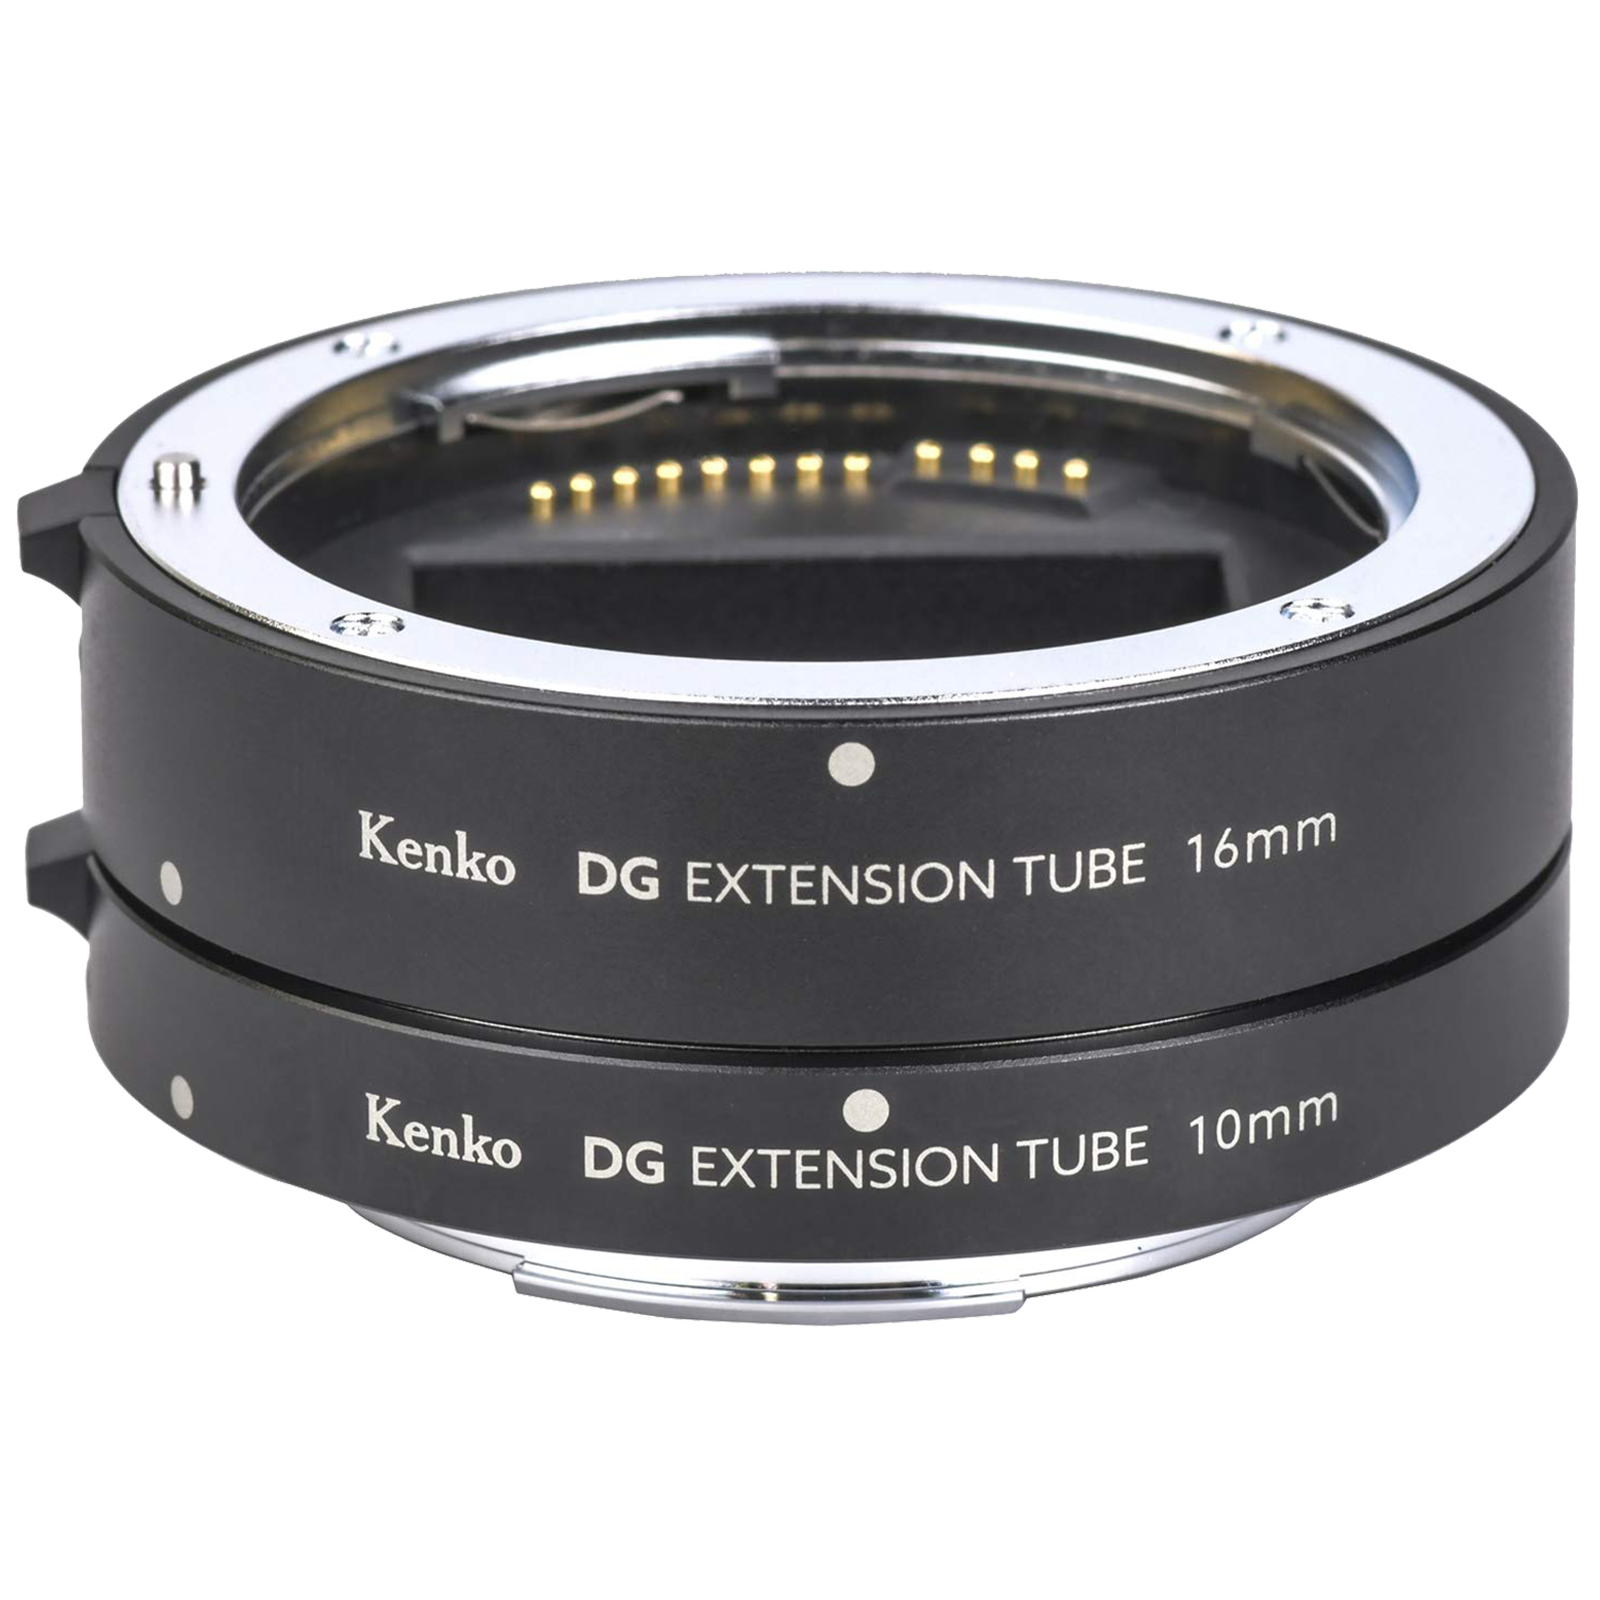 Kenko DG Extension Tube For Camera And Lens (Consisting Of Two Rings, 351550, Black)_1